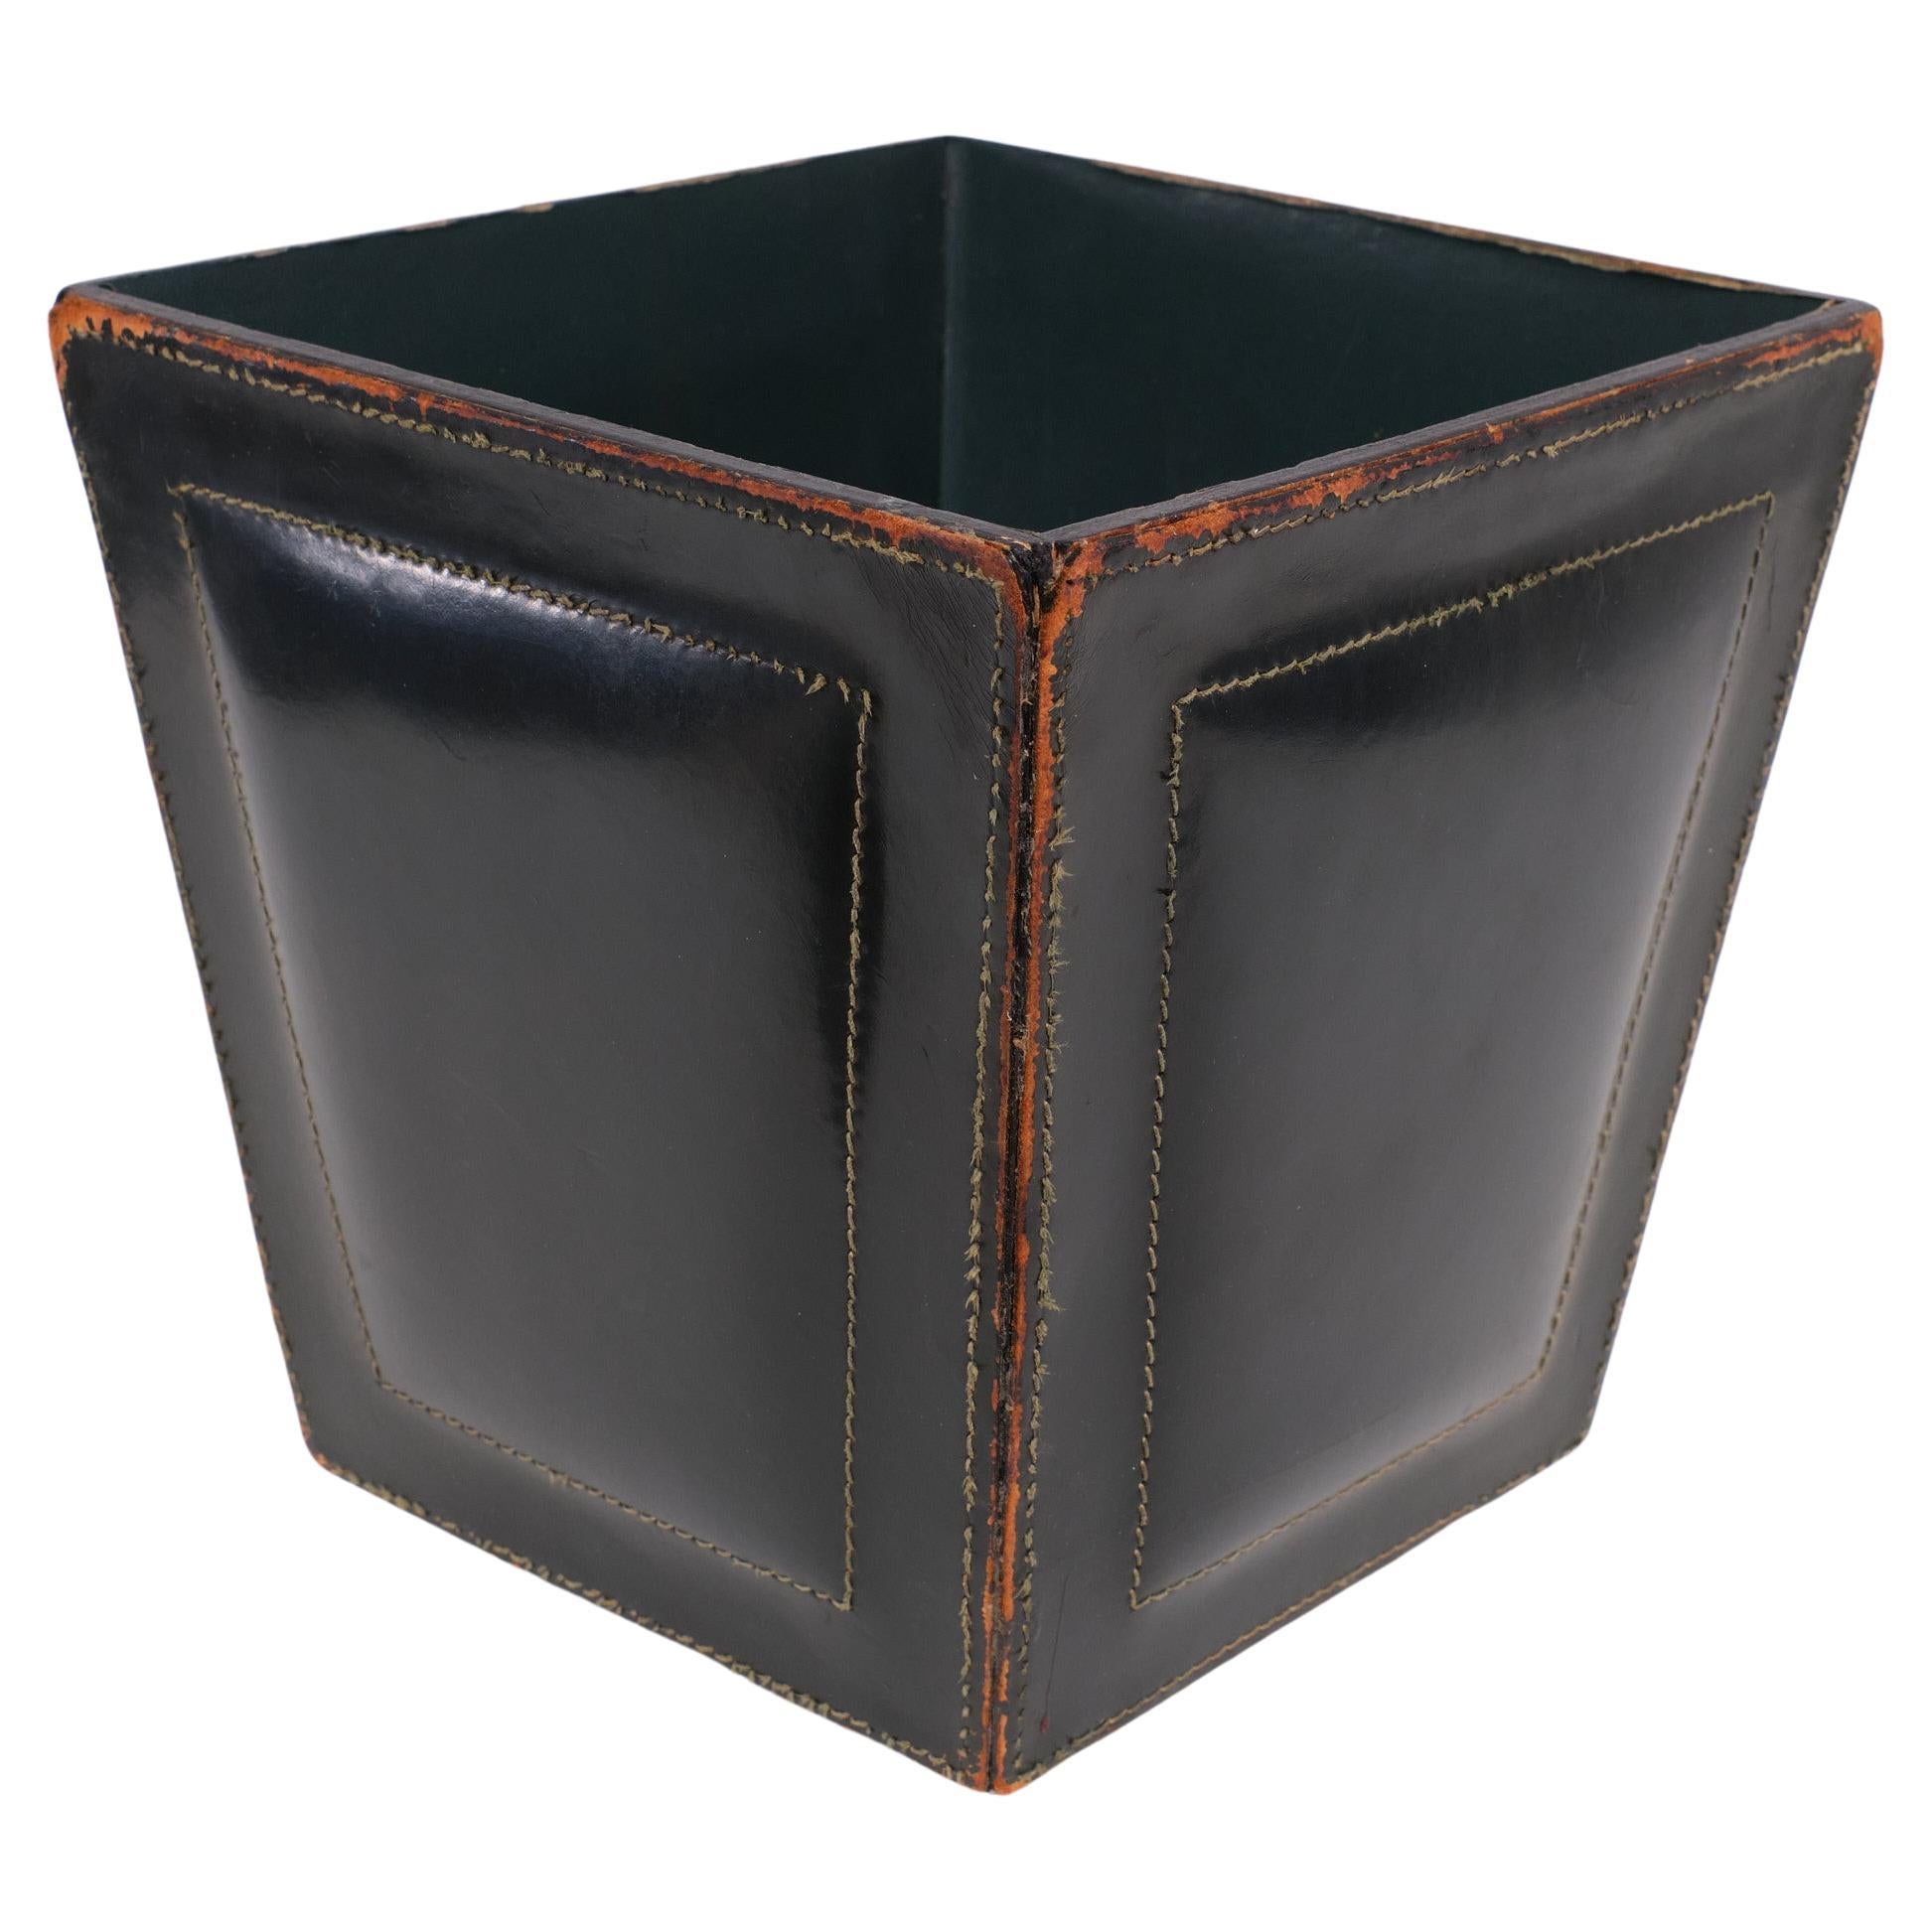 Stich Leather waste basket attrib Jacques Adnet   1950s France 